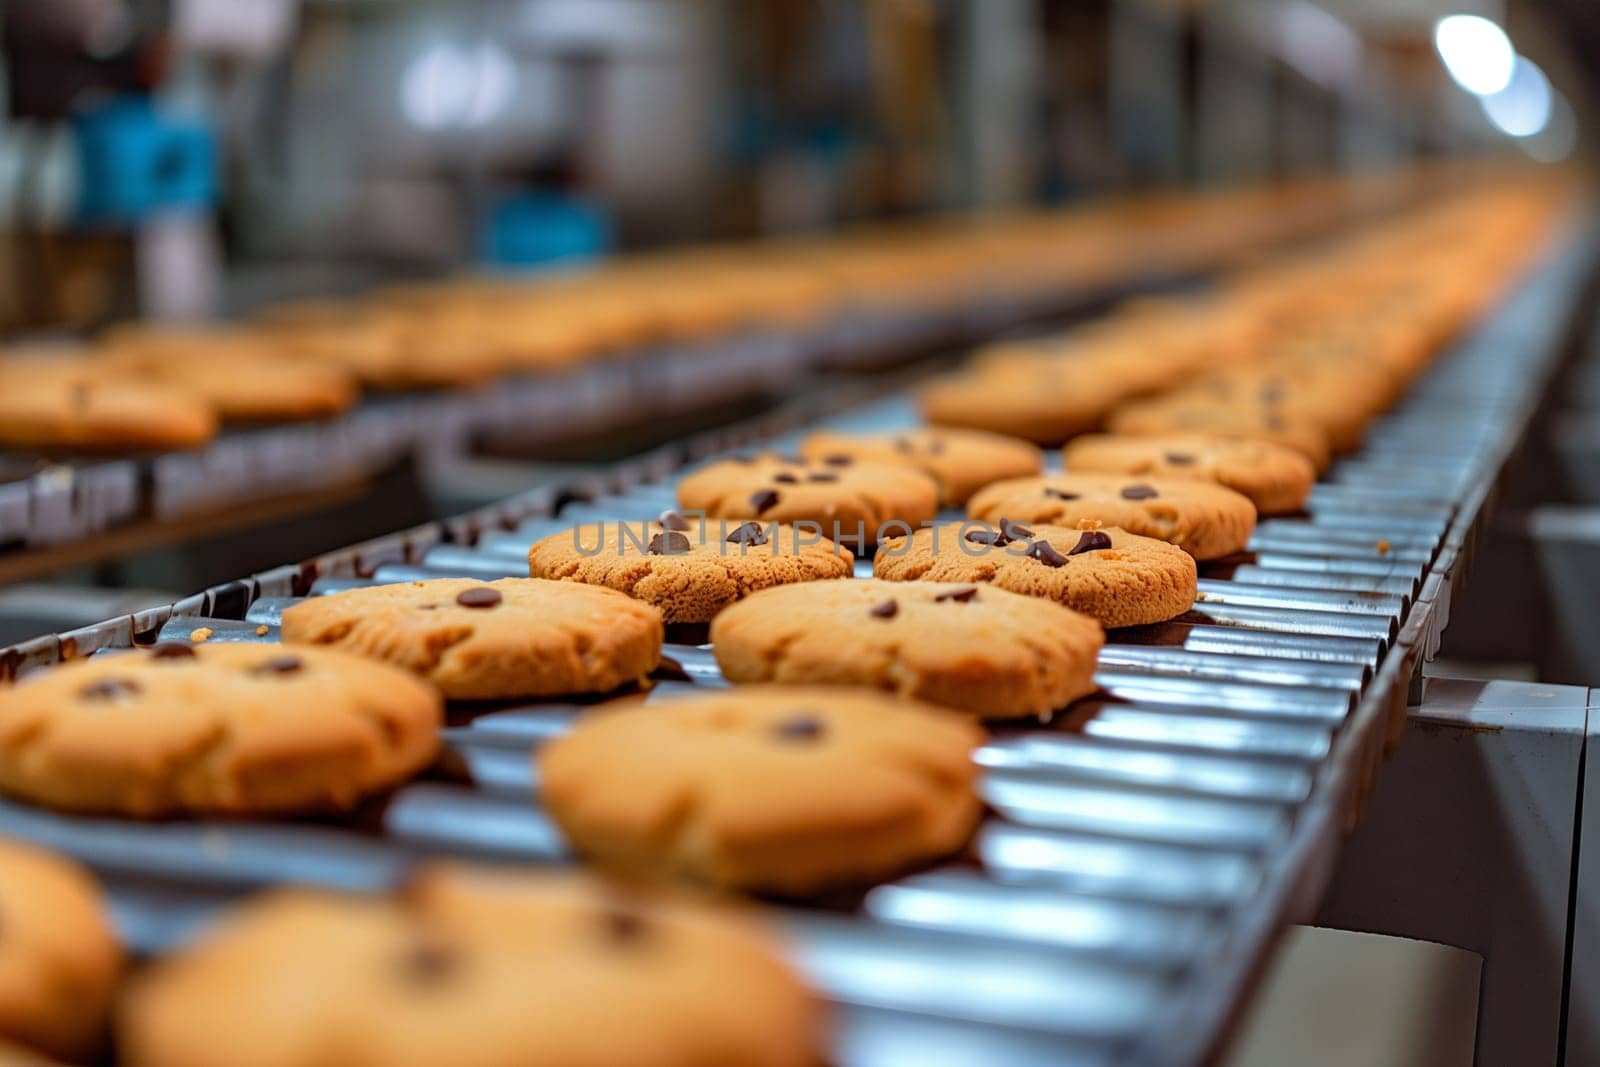 Freshly baked chocolate chip cookies moving along a conveyor belt to cool down before packaging.